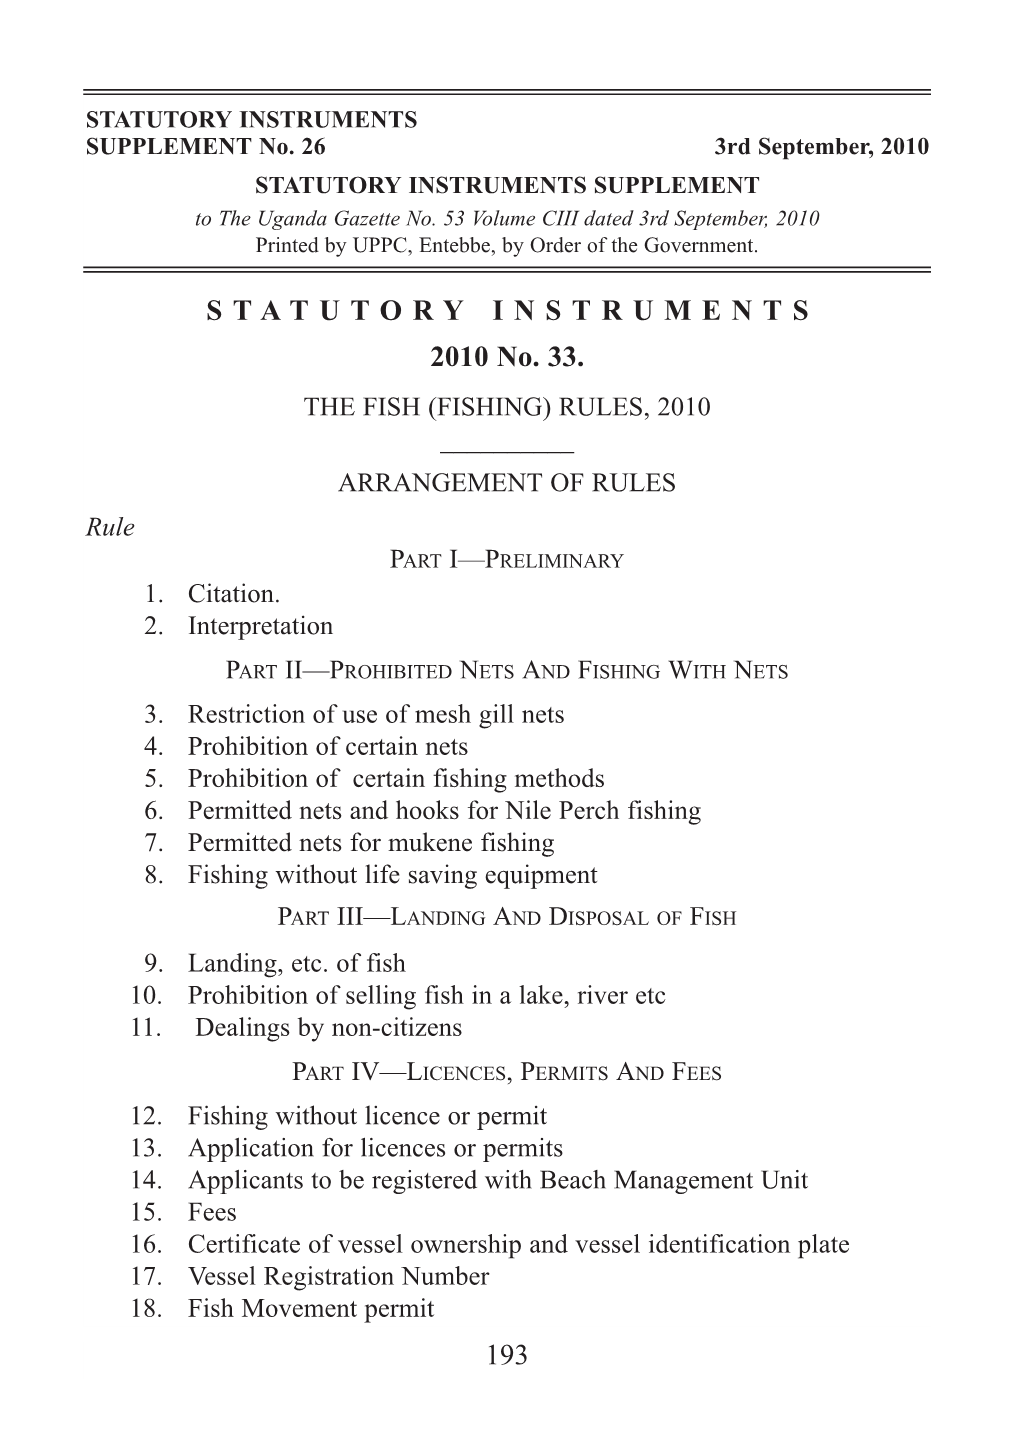 (FISHING) RULES, 2010 ______ARRANGEMENT of RULES Rule PART I—PRELIMINARY 1